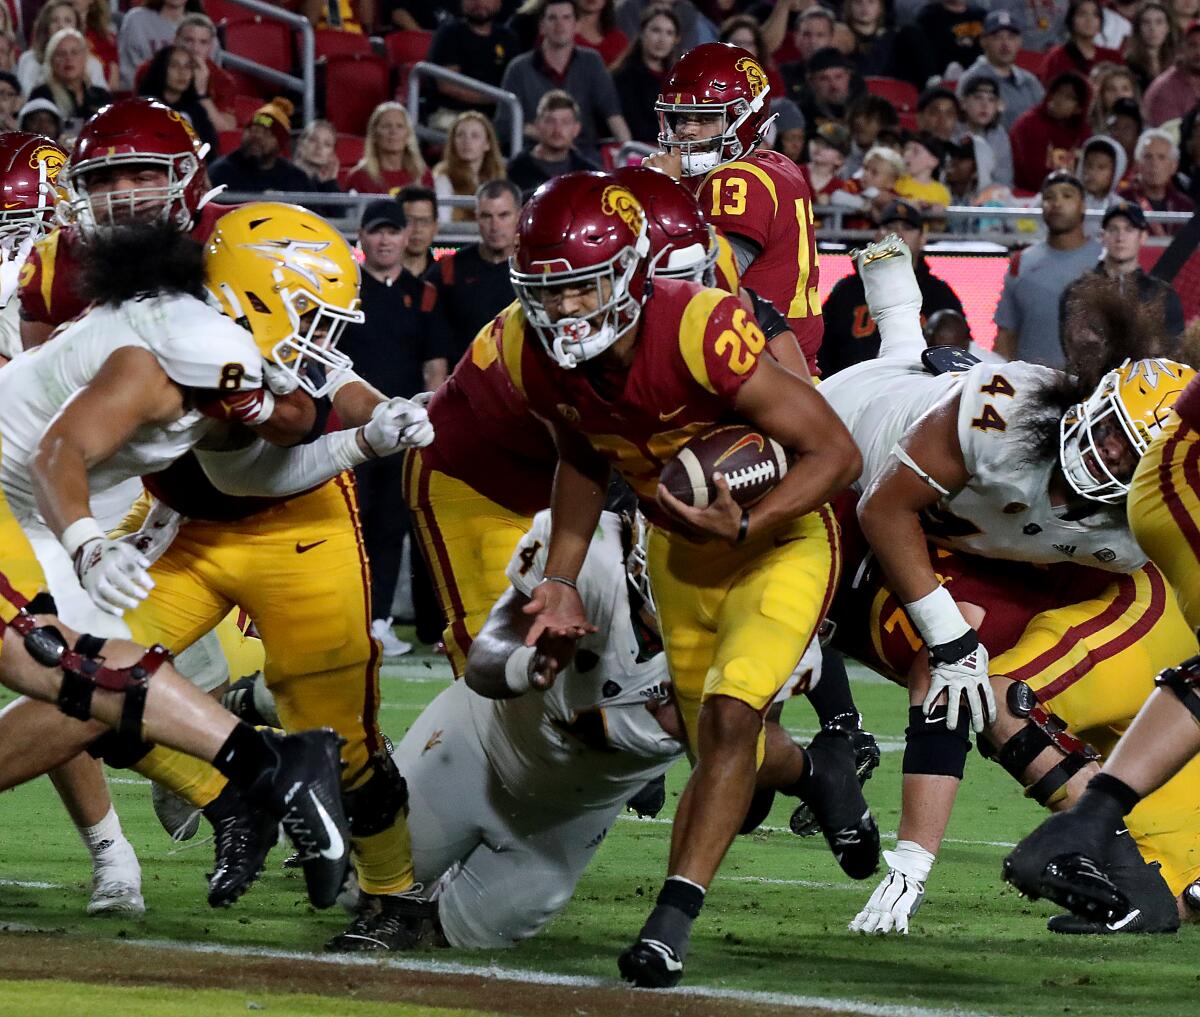 Travis Dye carries the ball into the end zone for USC.